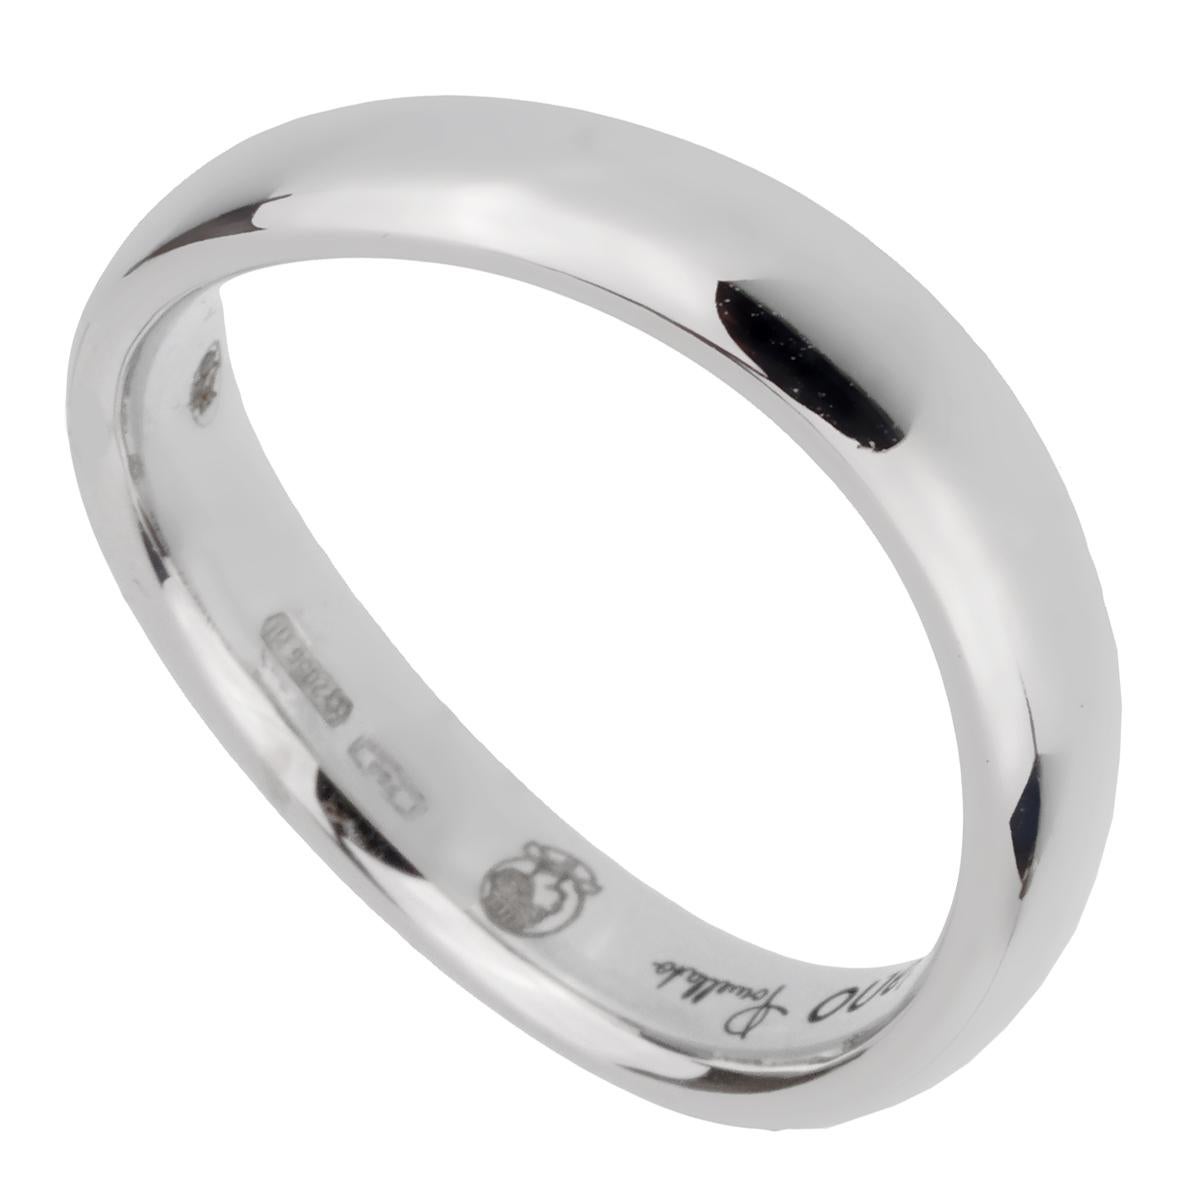 A chic Pomellato wave style band crafted in 18k white gold, the ring measures a size 5 and can be resized.

Pomellato Retail Price: $1350
Sku: 2402